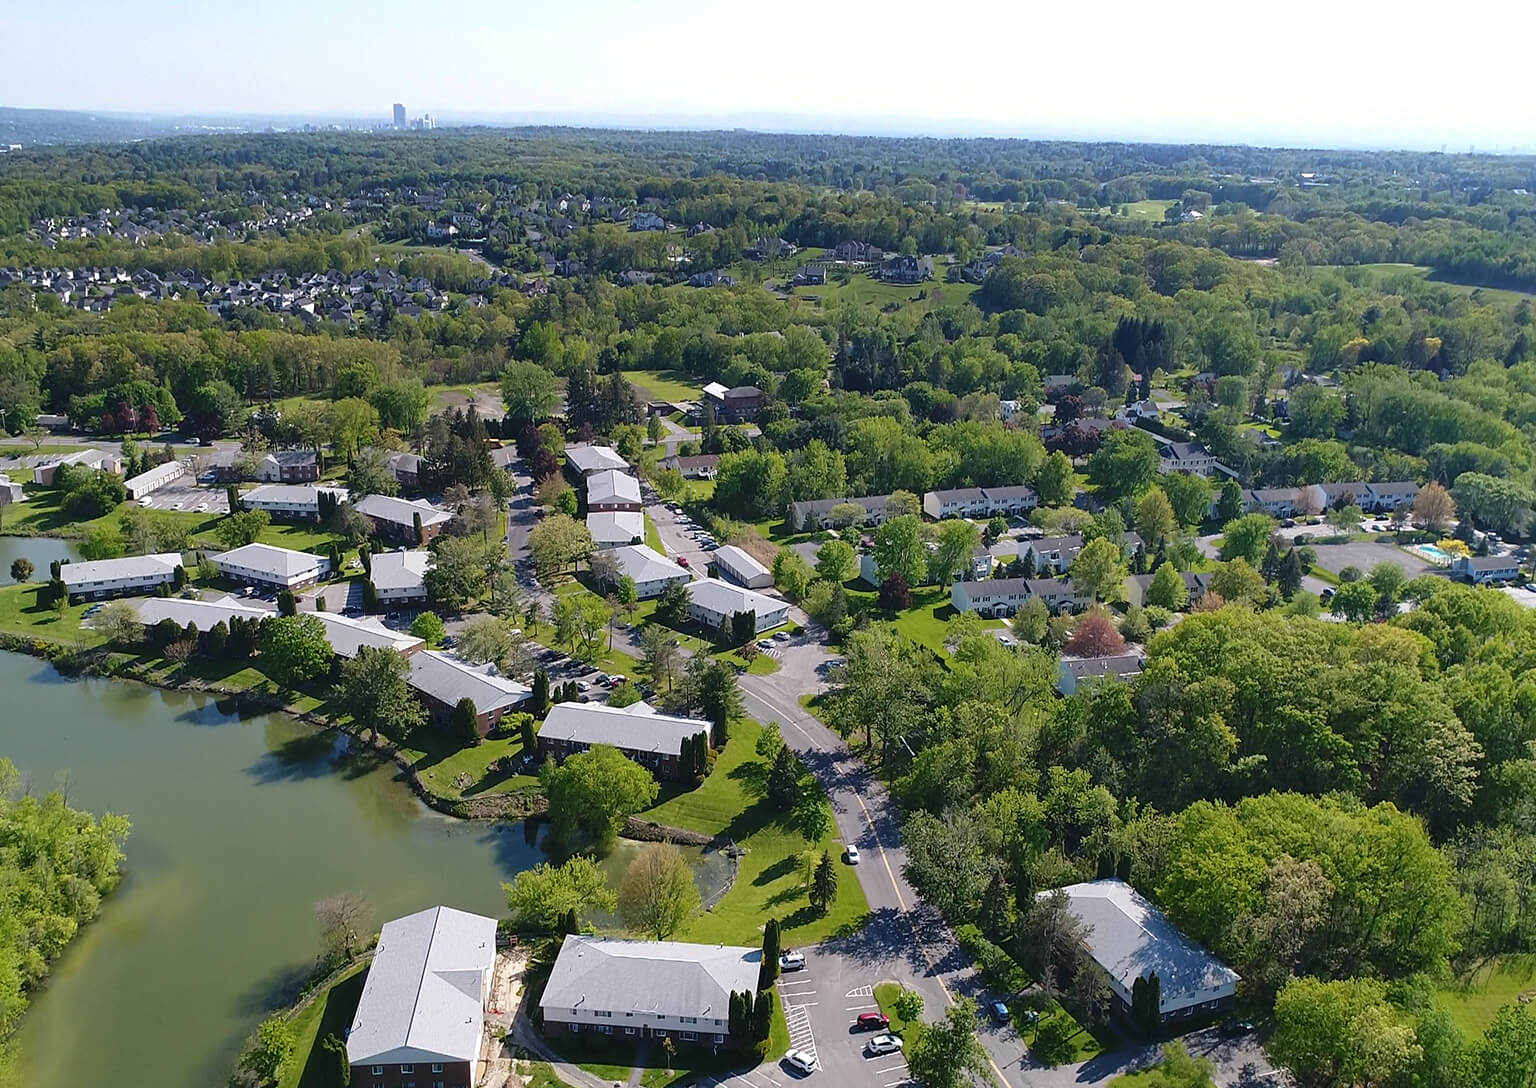 Ariel view of spacious and green property at Lake Shore Park Apartments in Watervliet, New York